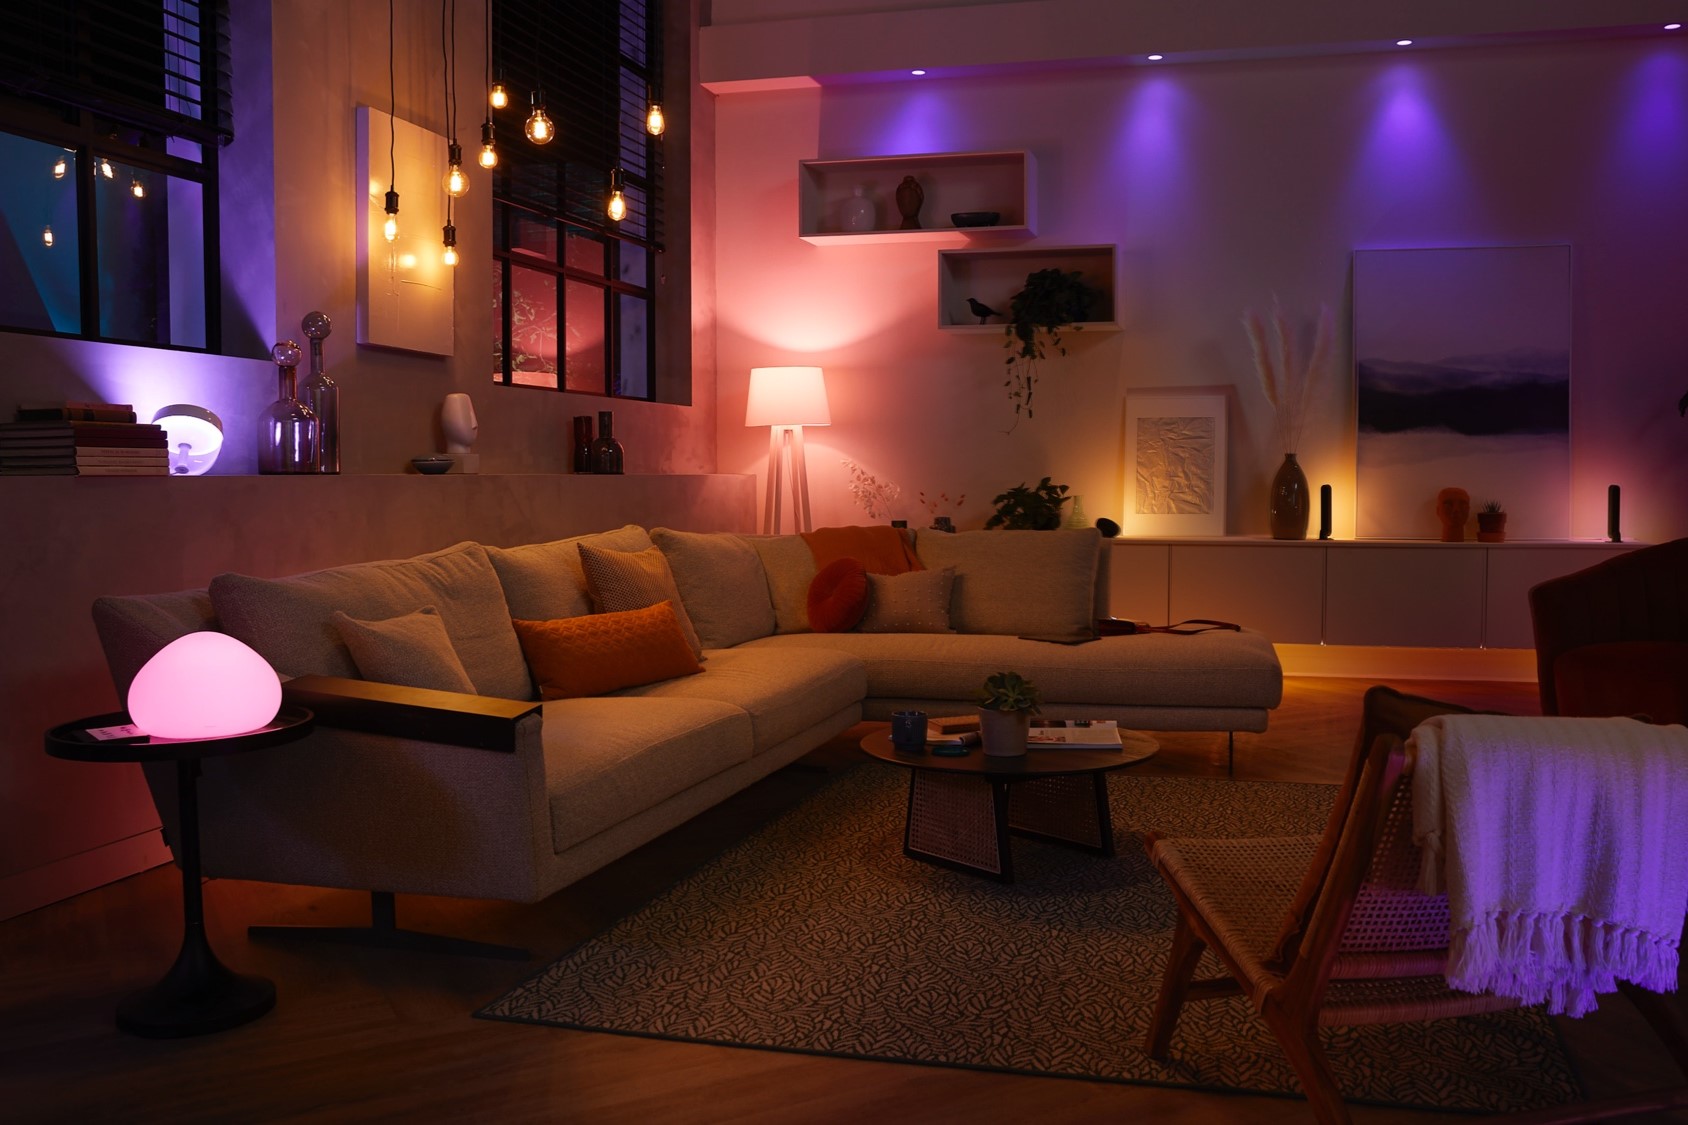 How To Make Philips Hue Lights Cycle Through Colors